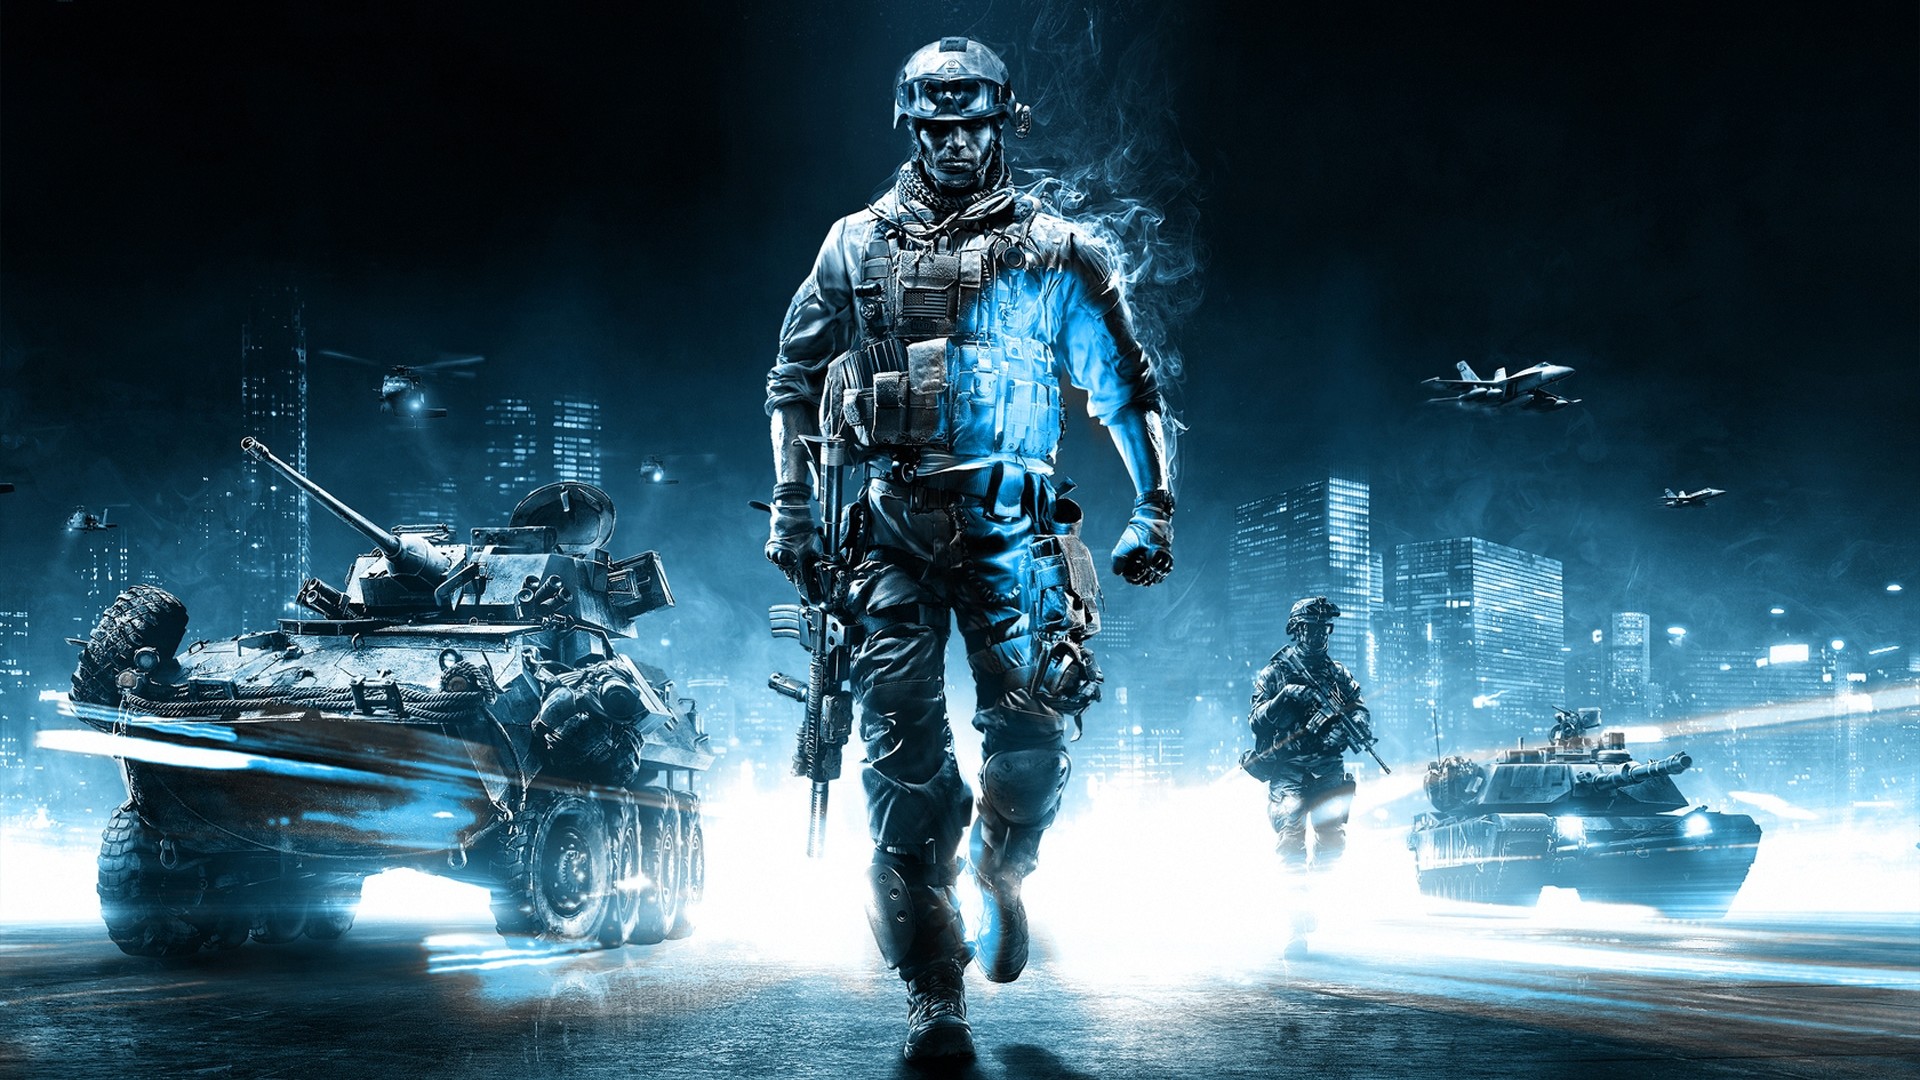 1920x1080 Awesome 50 Games Wallpapers | HD Widescreen Pics SHunVMall PC .